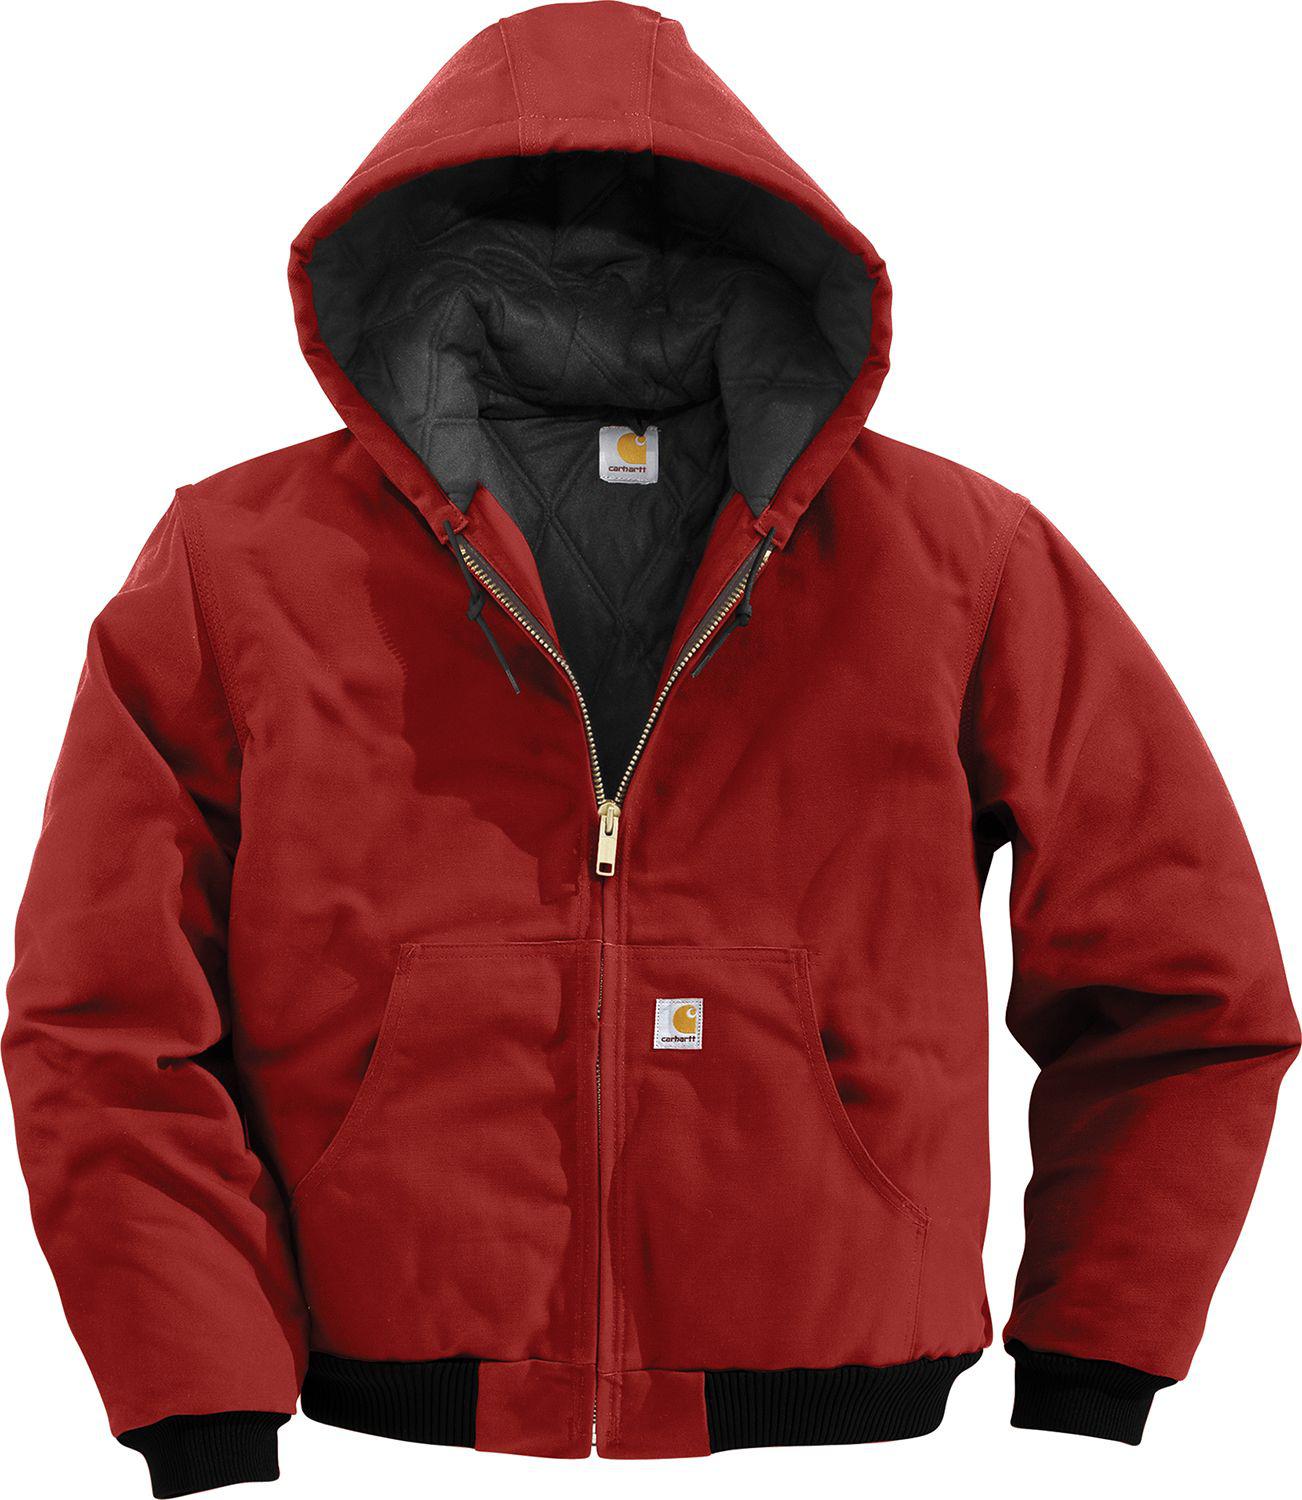 Vintage 2004 Carhartt Insulated Hooded Jacket –, 60% OFF